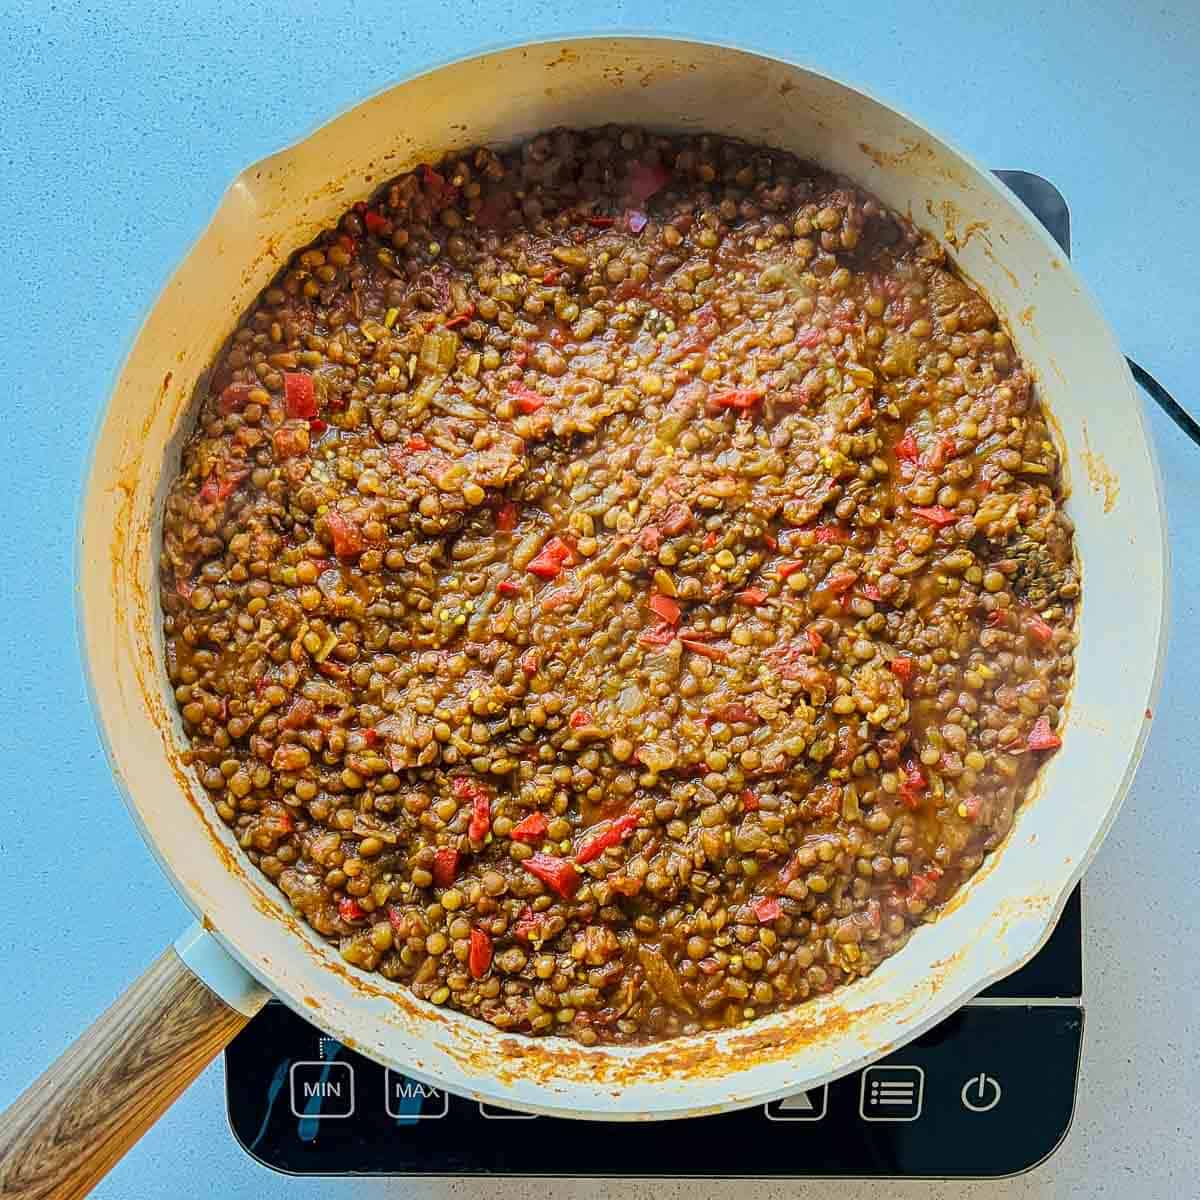 Cooked lentils ready to be stuffed.